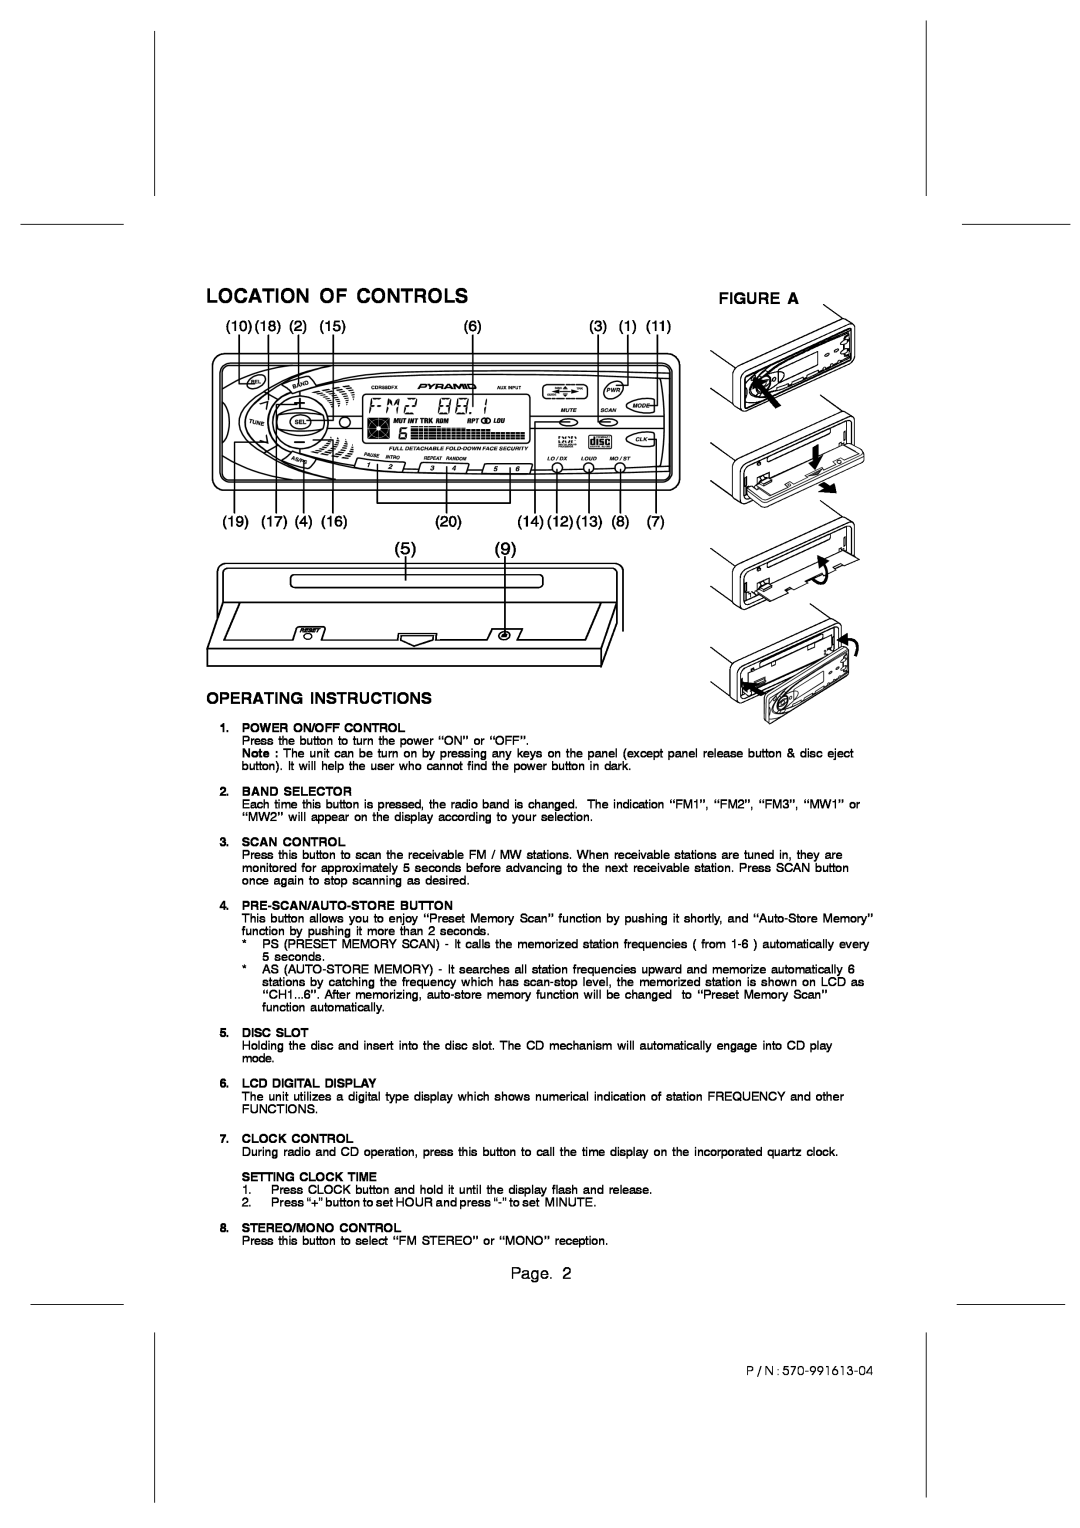 Pyramid Car Audio CDR88DFX owner manual Figure A, Operating Instructions, Location Of Controls, Page 